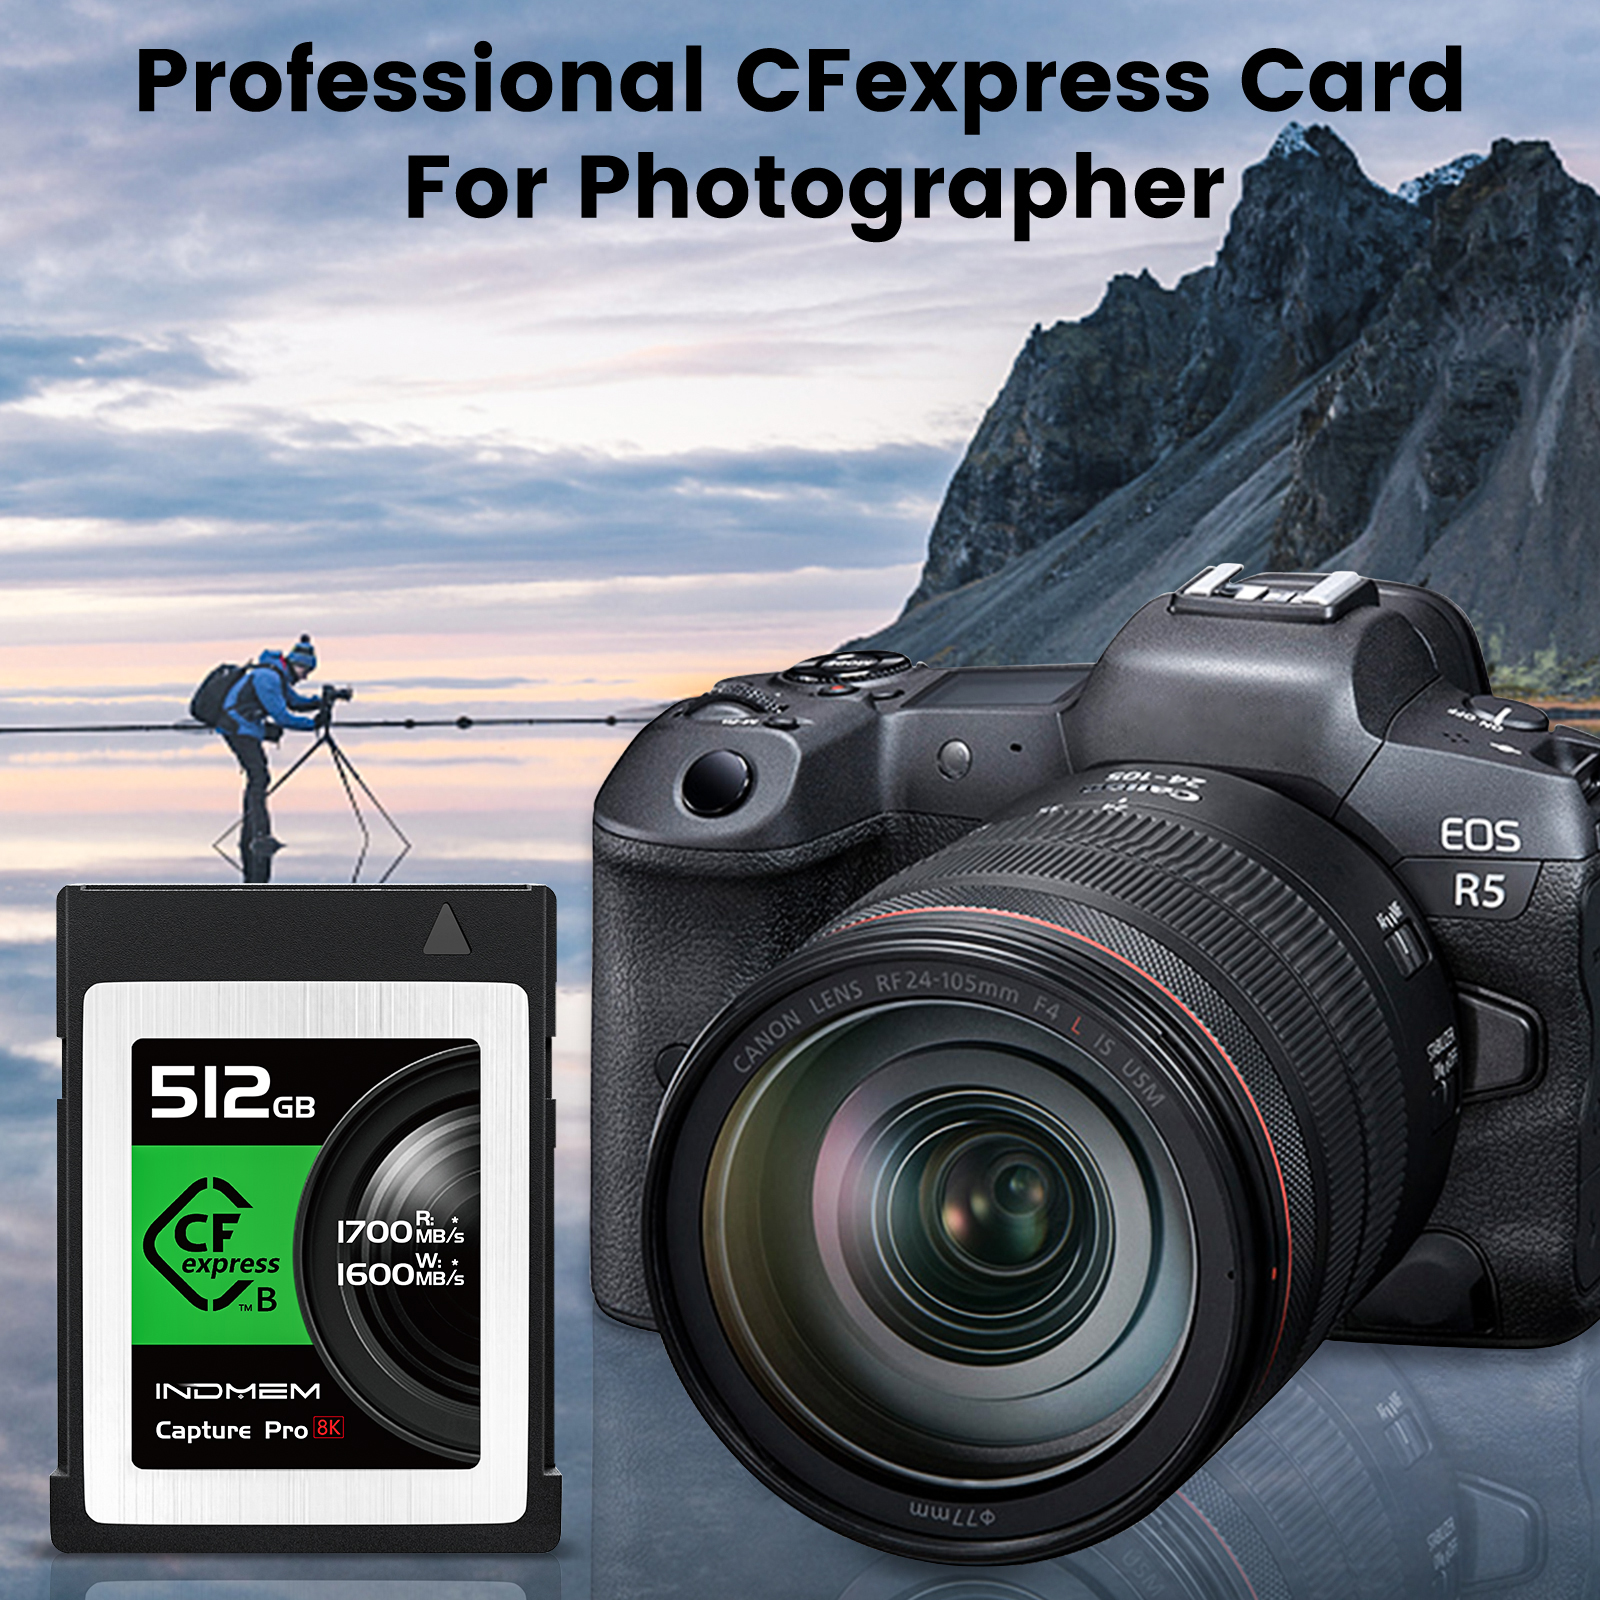 CFexpress Type B Memory Card 2TB/1TB/512GB/256GB/128GB support Raw 8K/4K Video Recording up to 1700MB/s Read, 1600MB/s Write